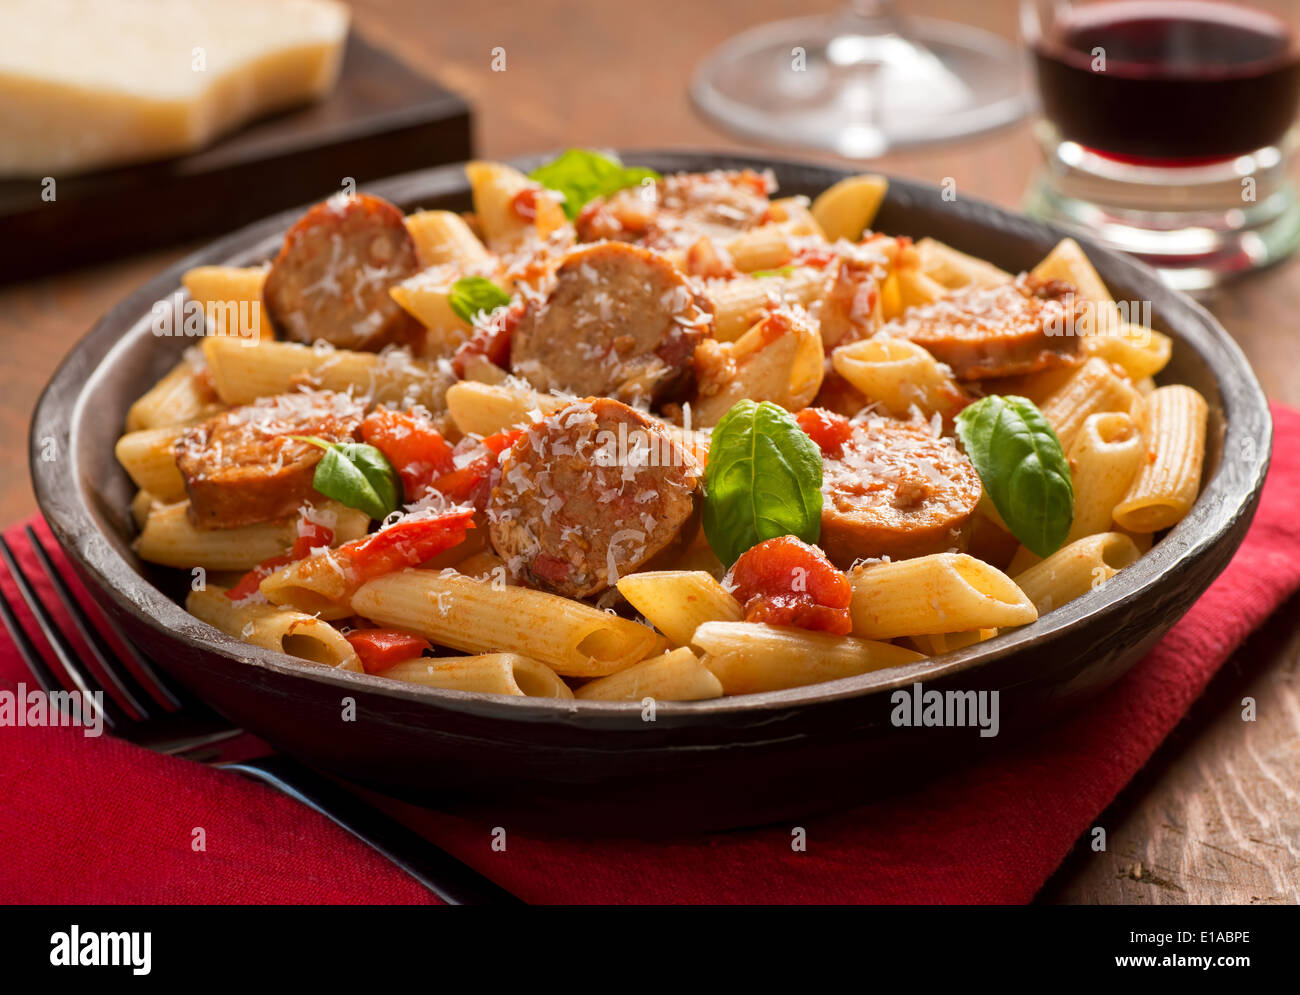 Cajun style pasta with penne, spicy sausage, red peppers, and tomato sauce with freshly grated parmesan cheese. Stock Photo